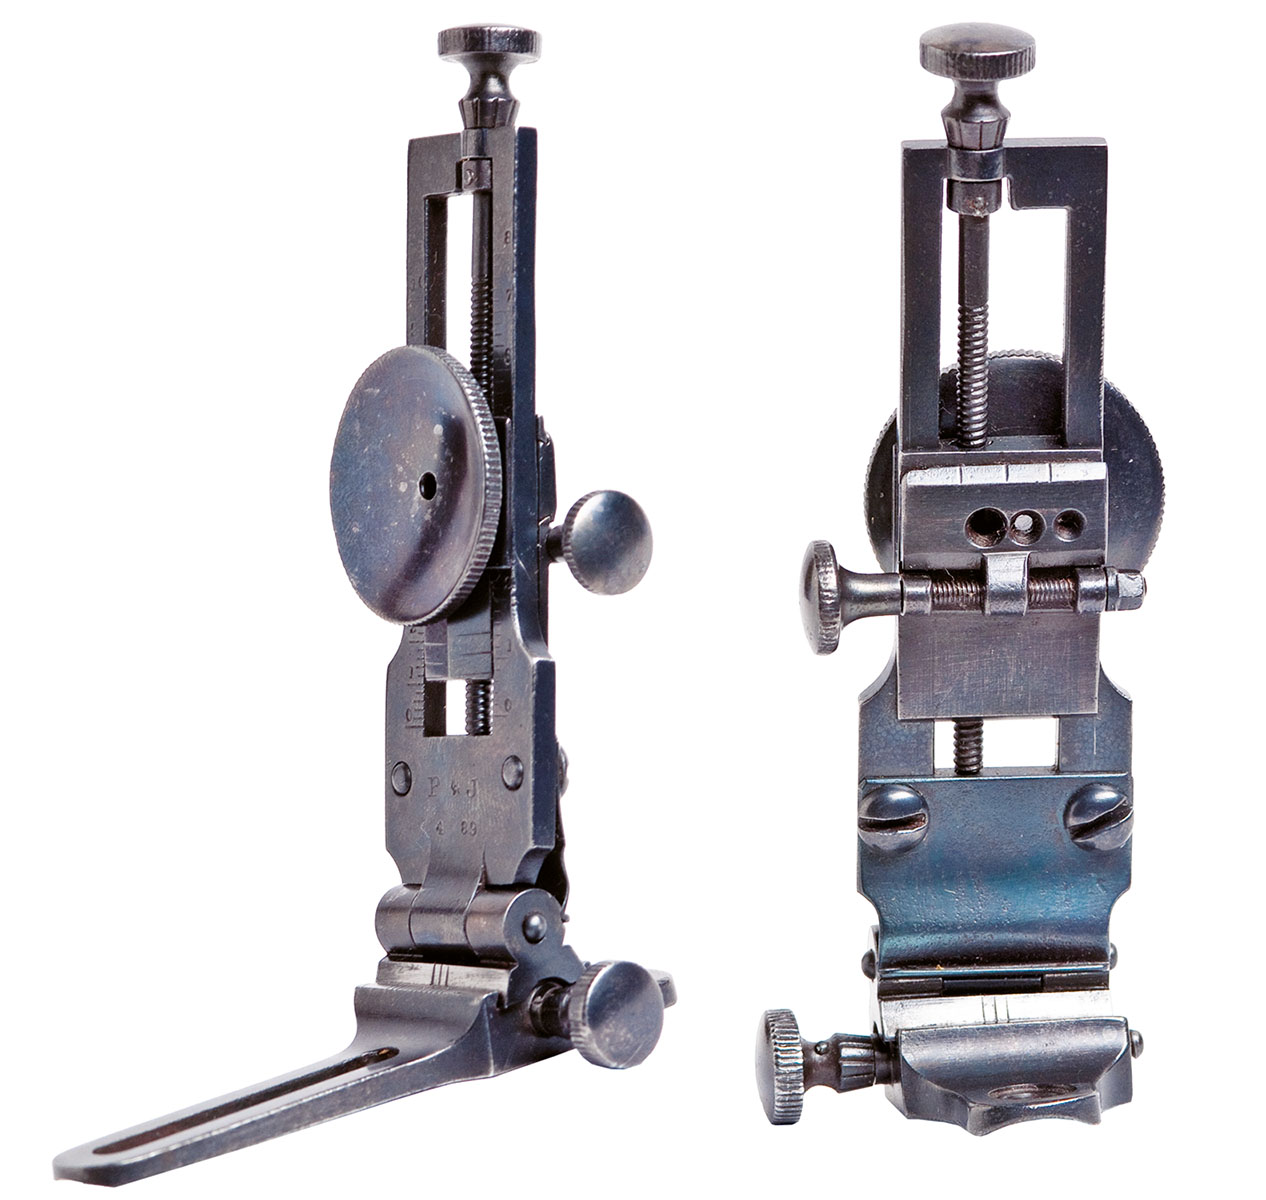 Carver’s Patent AB Combination Tang Sight. The Soule sight, of which there were only about 120 made, has survived in reasonable numbers. All of the various Carver sights are rarely found. Carver had many clever ideas in his designs, of which there were several more. They are extreme rarities today.